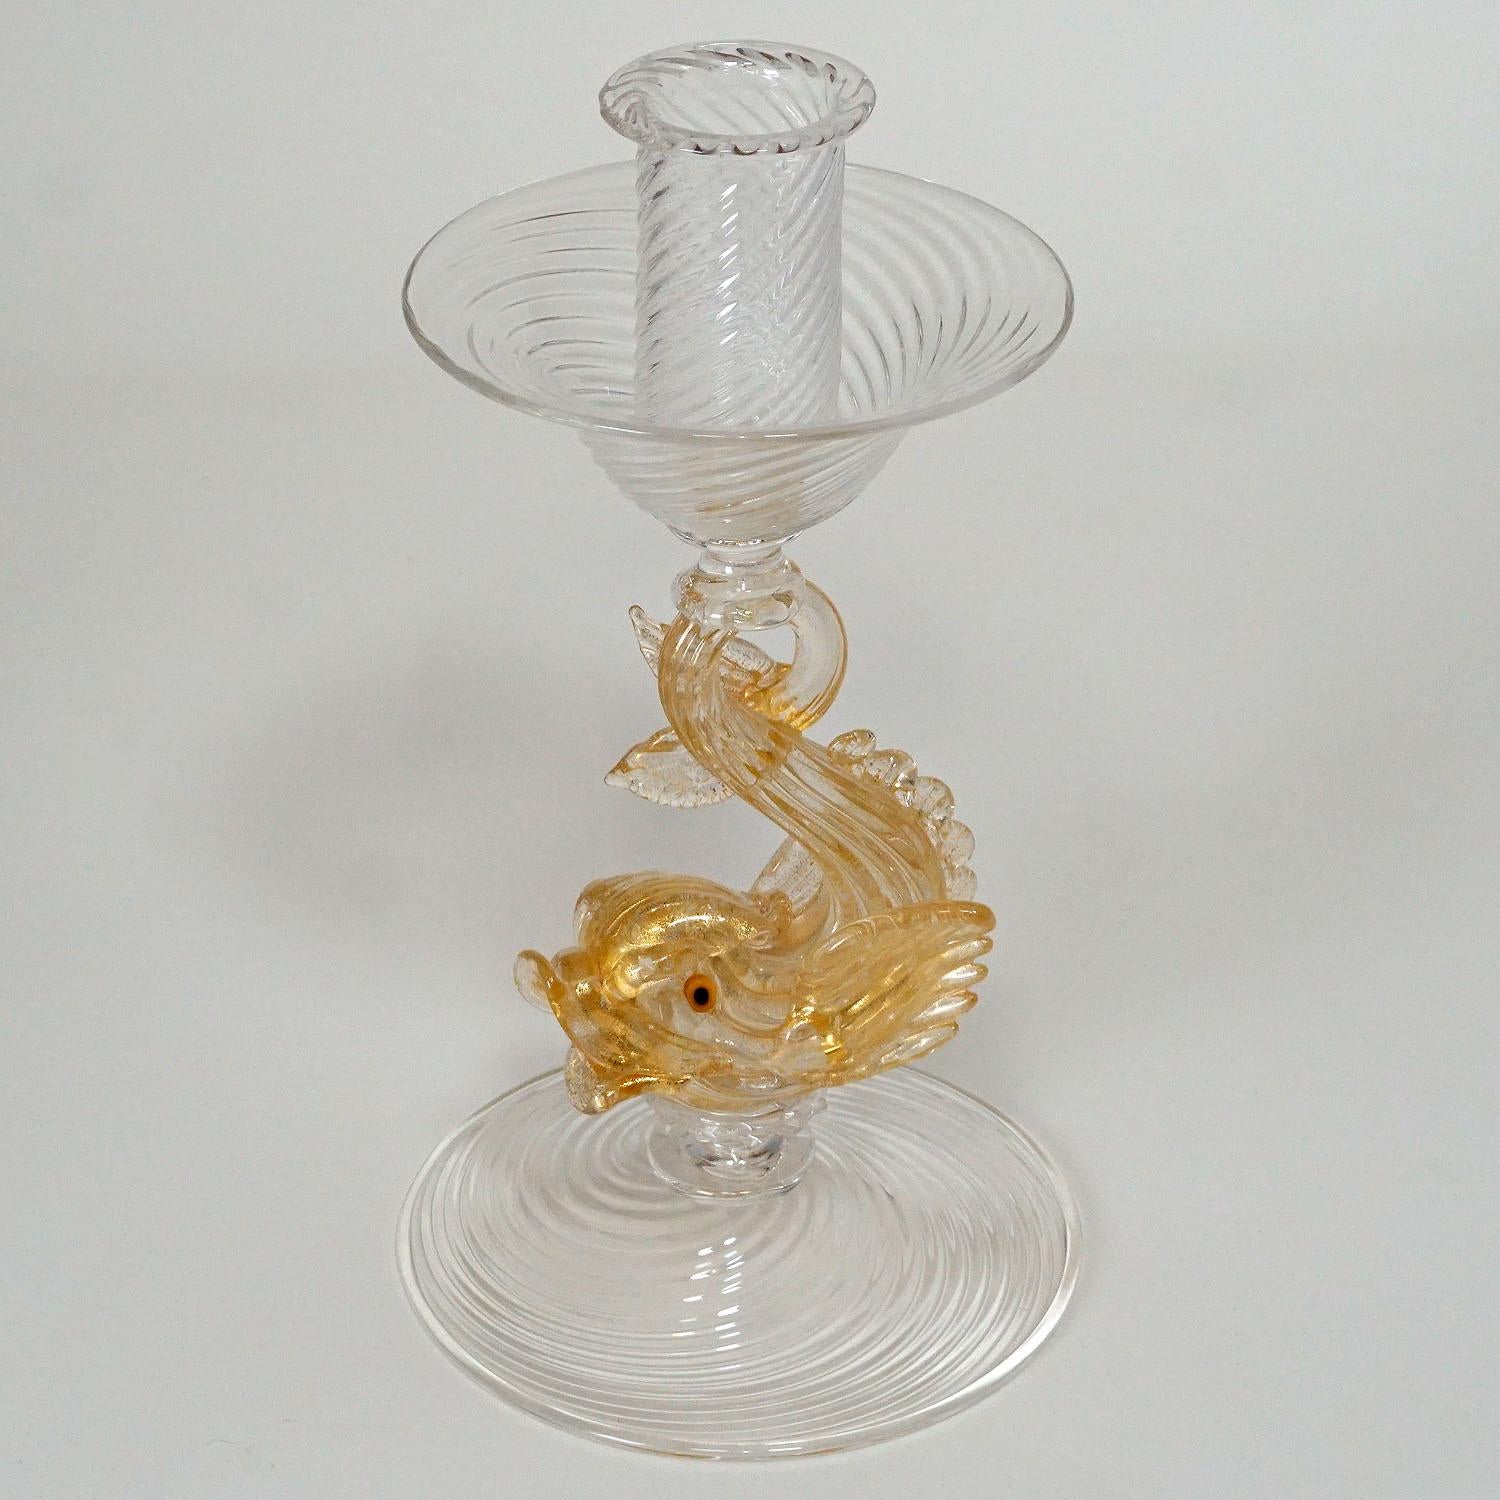 Italian Archimede Seguso Glass Candle Stick with Dolphin, circa 1960s For Sale